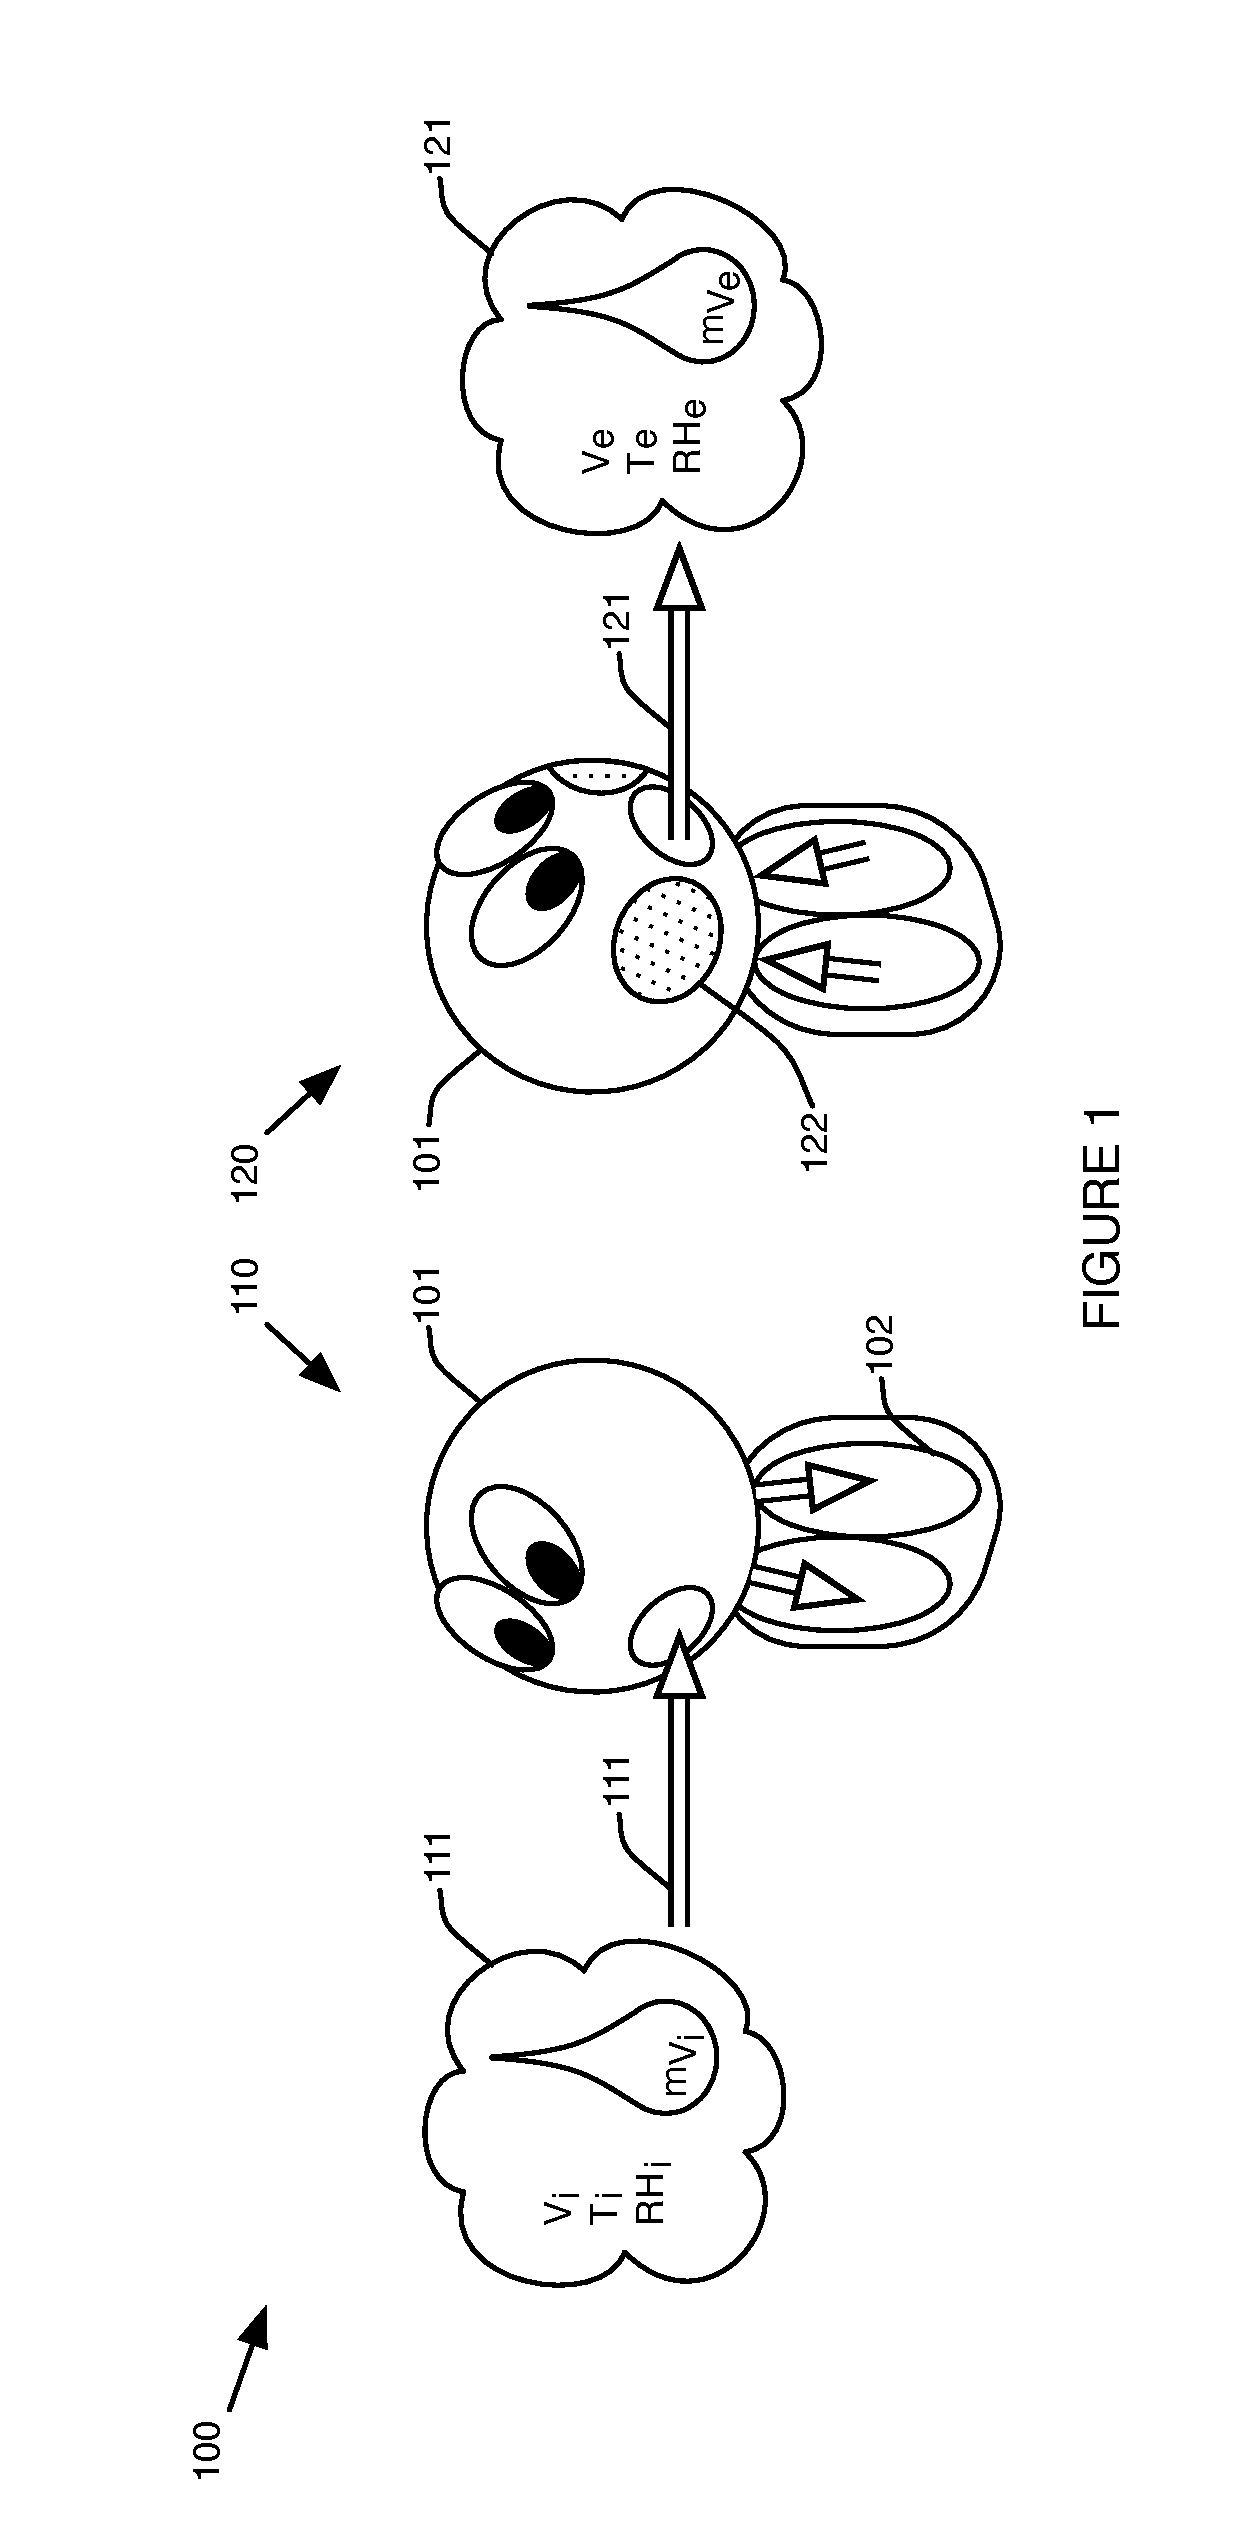 System and method for monitoring human water loss through expiration and perspiration